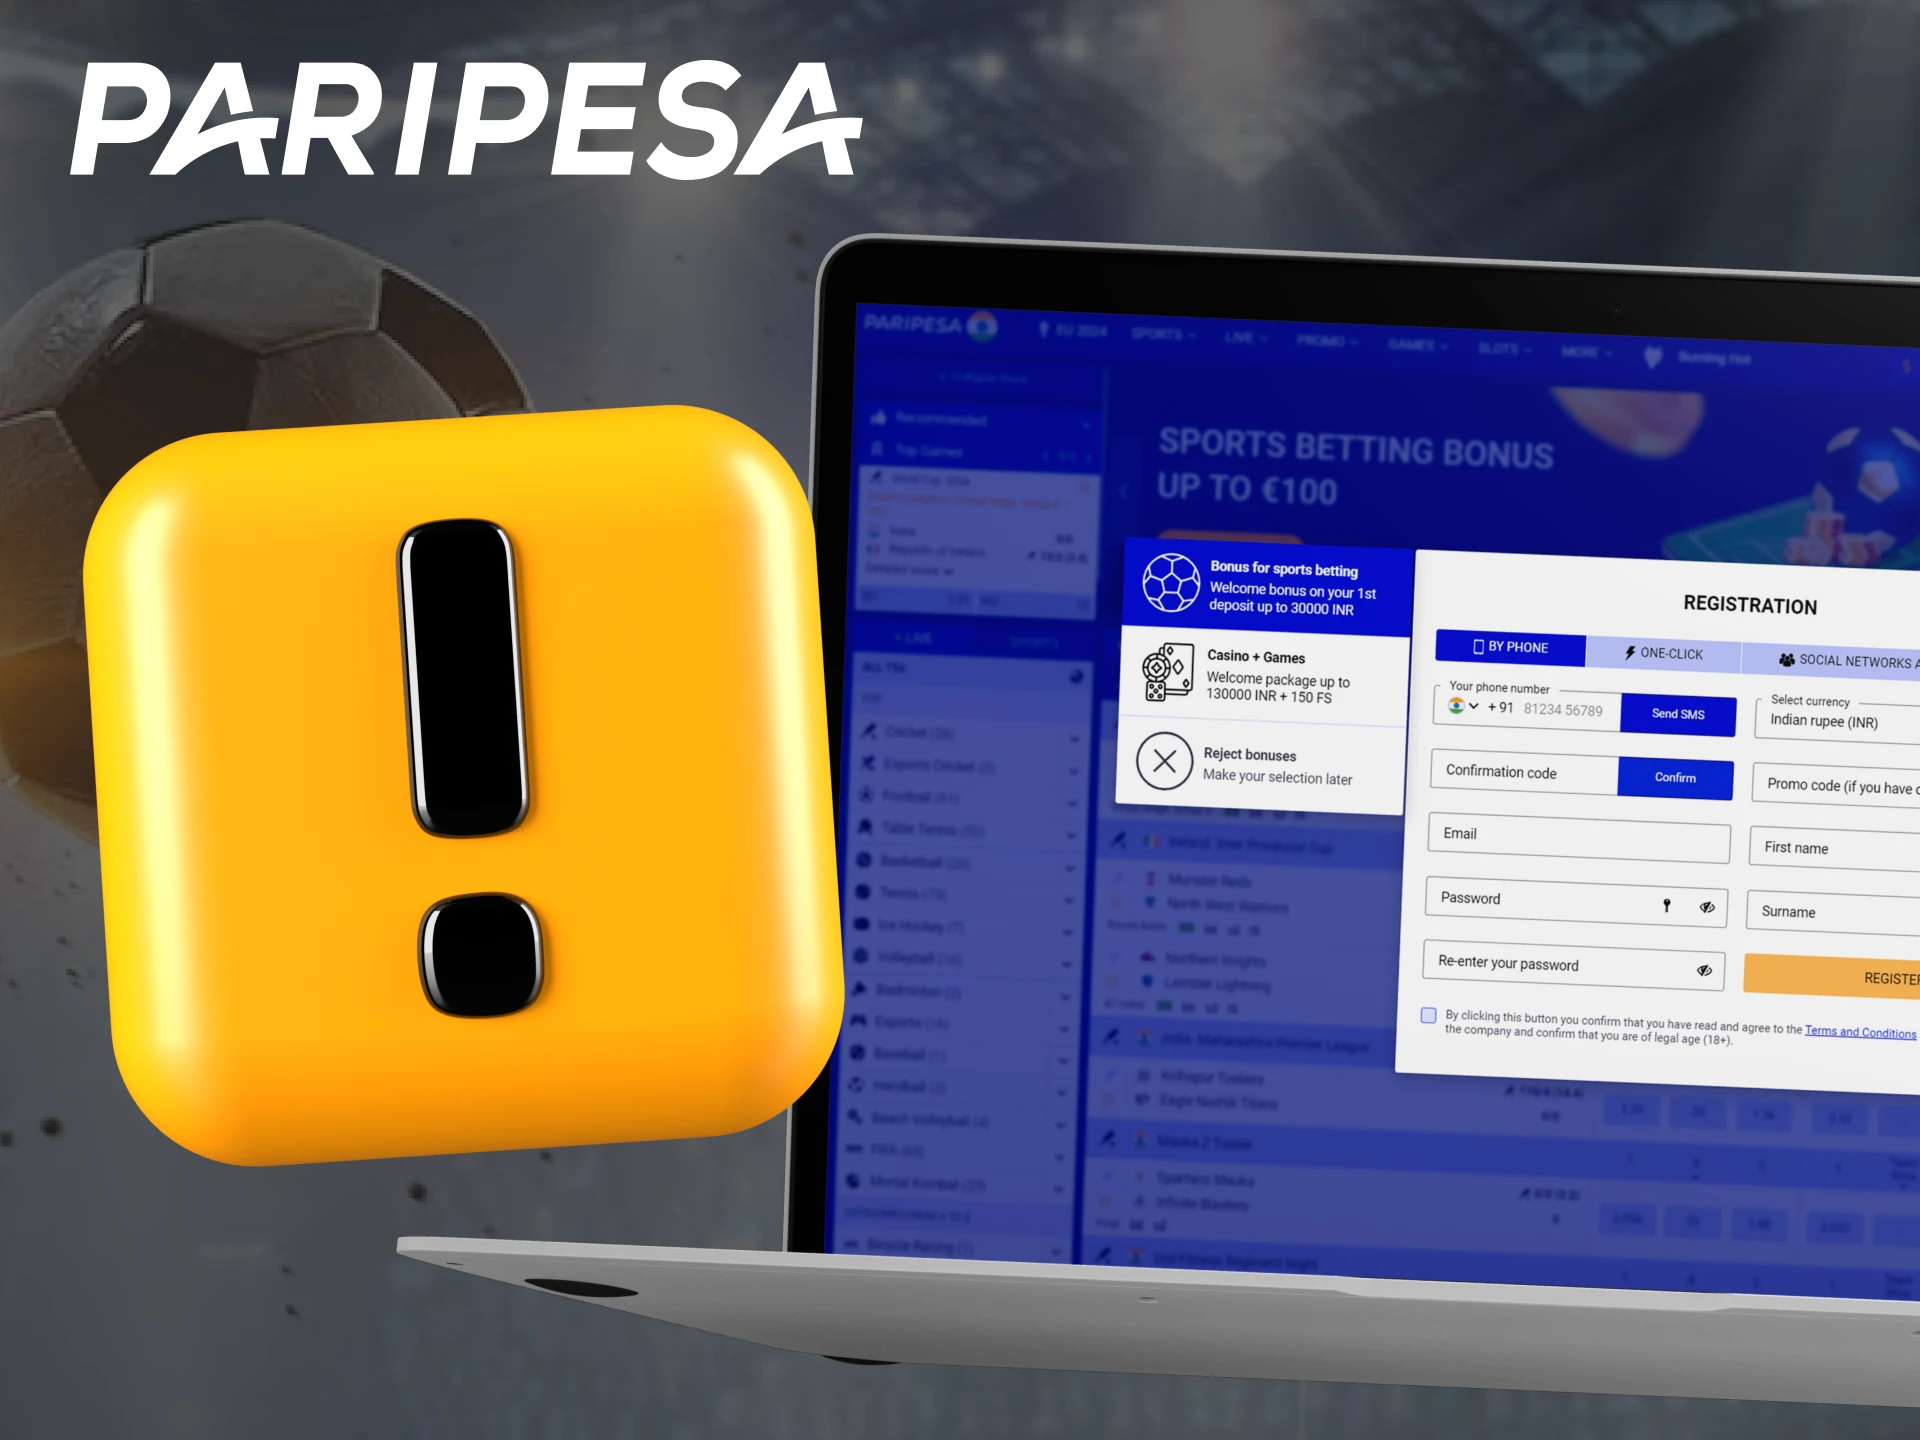 Find out what problems you may encounter when registering with Paripesa.